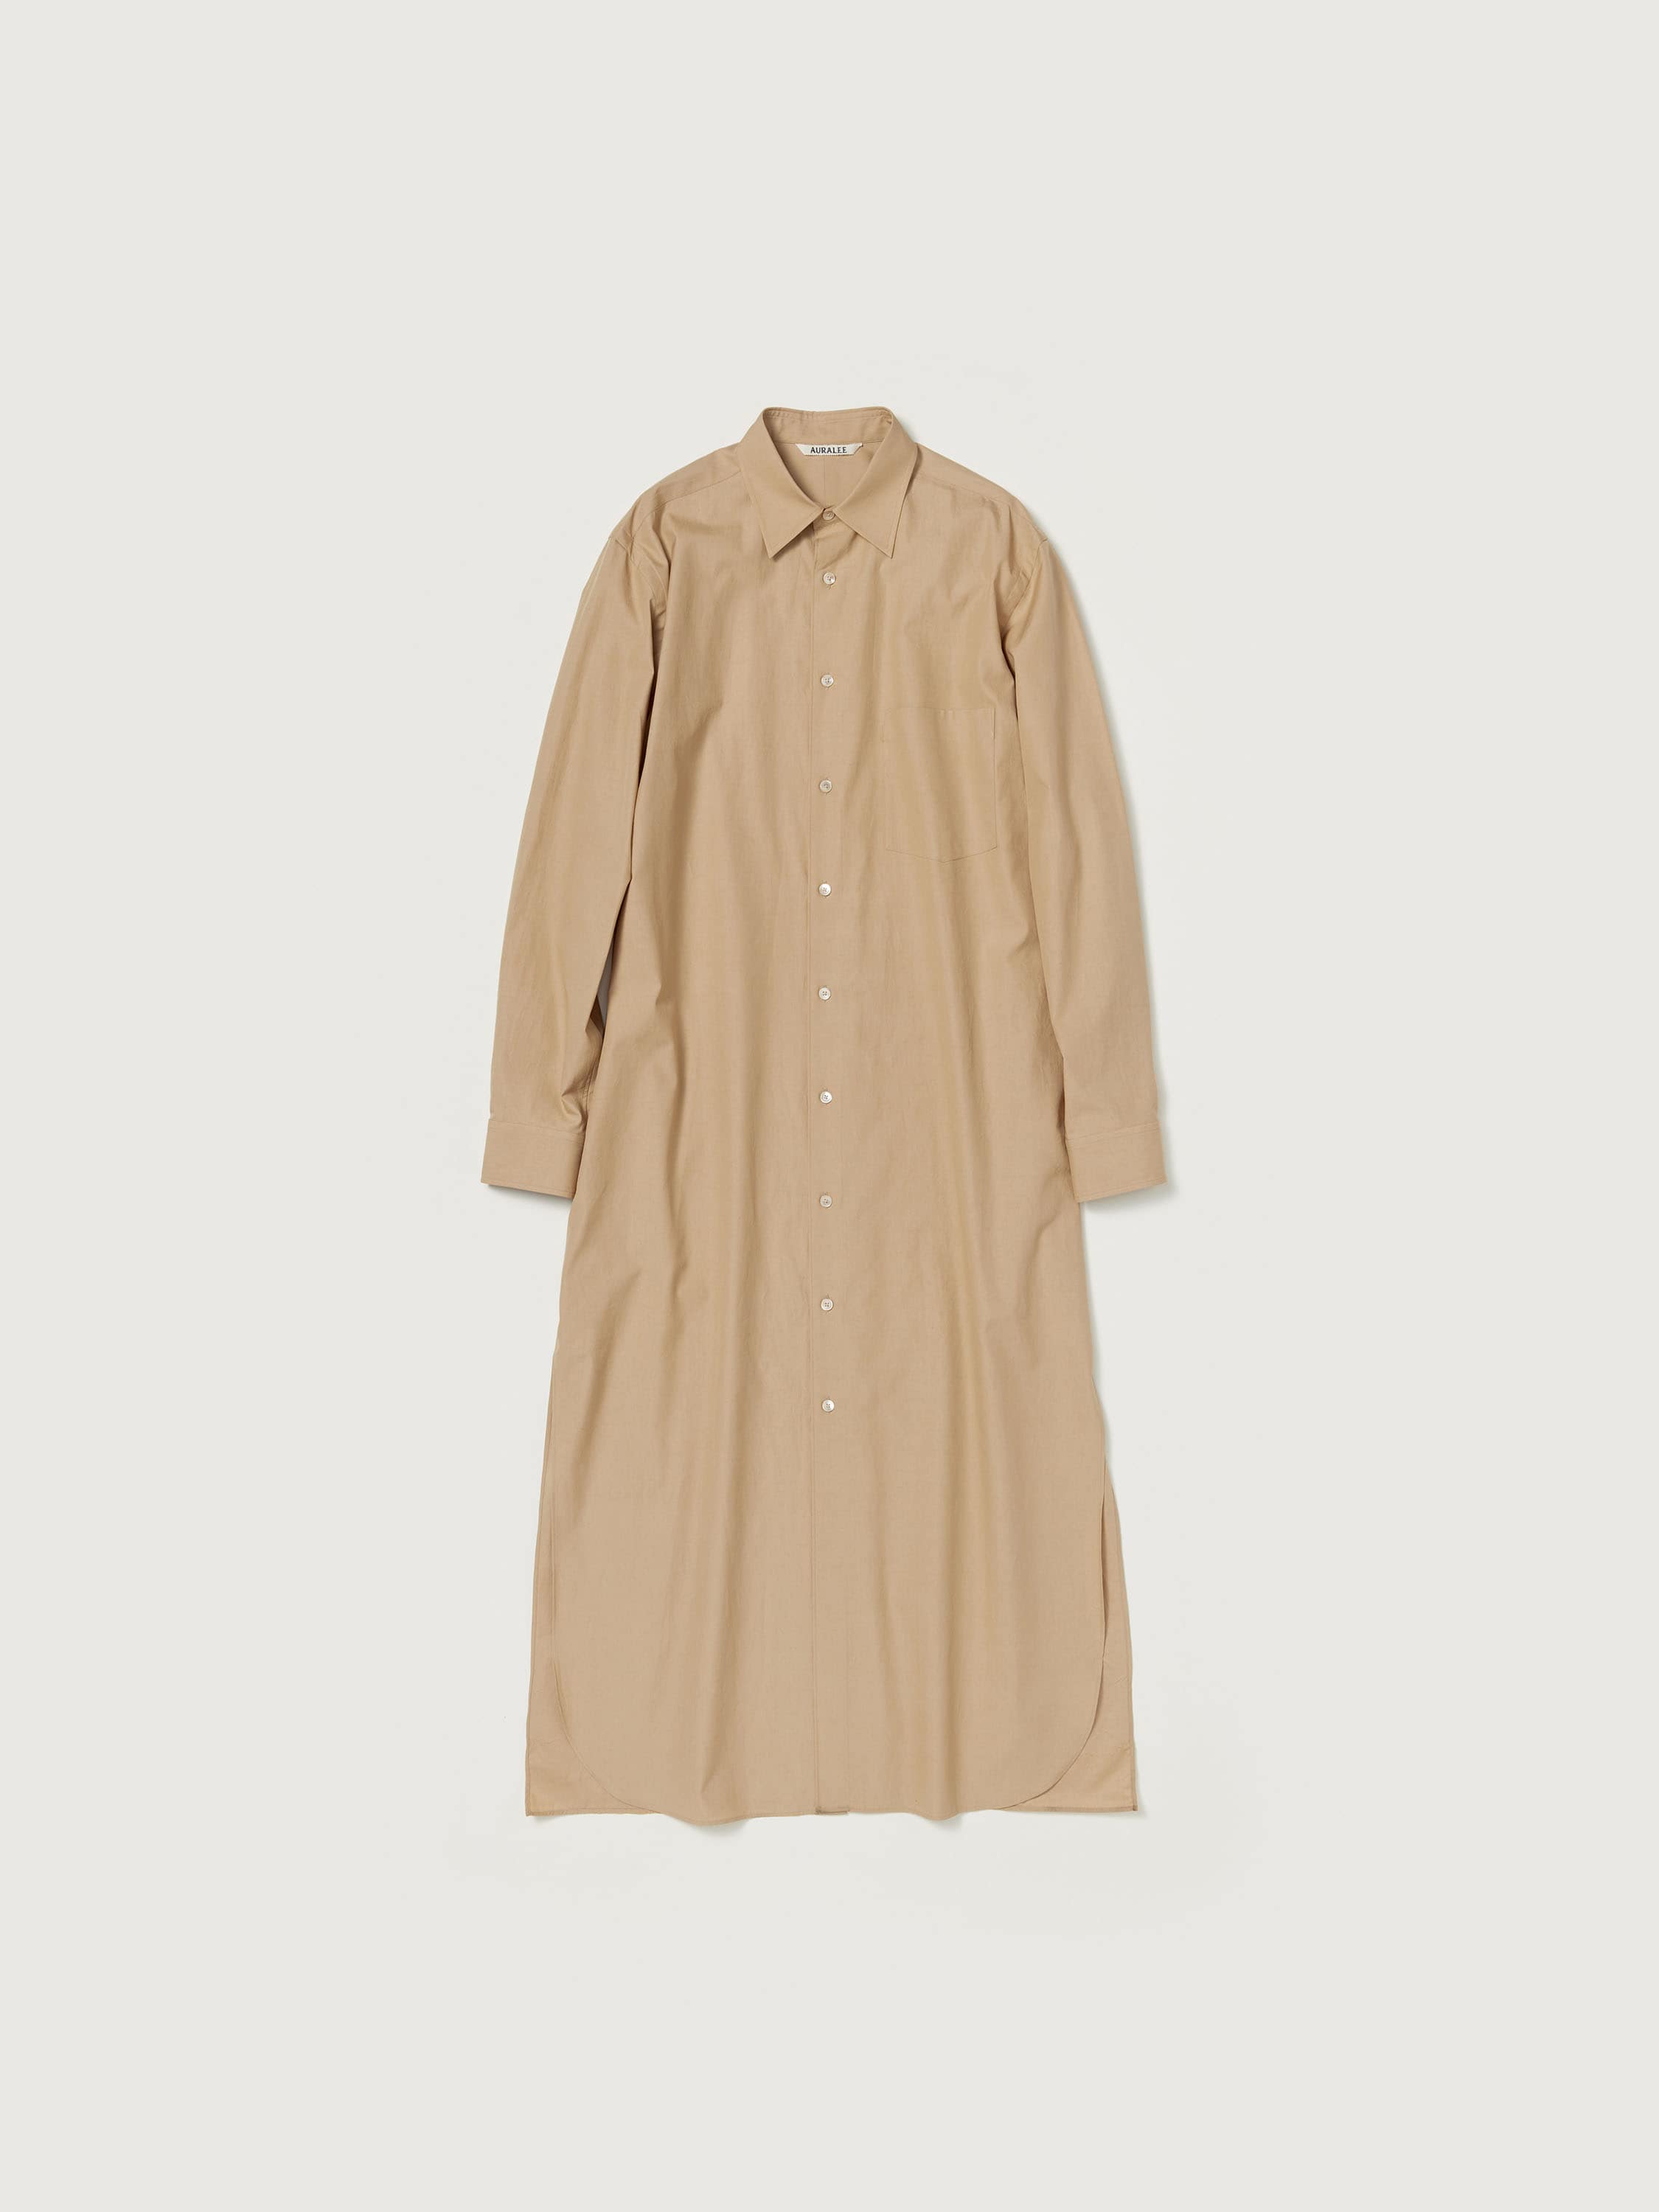 WASHED FINX TWILL ONE-PIECE 詳細画像 LIGHT BROWN 1